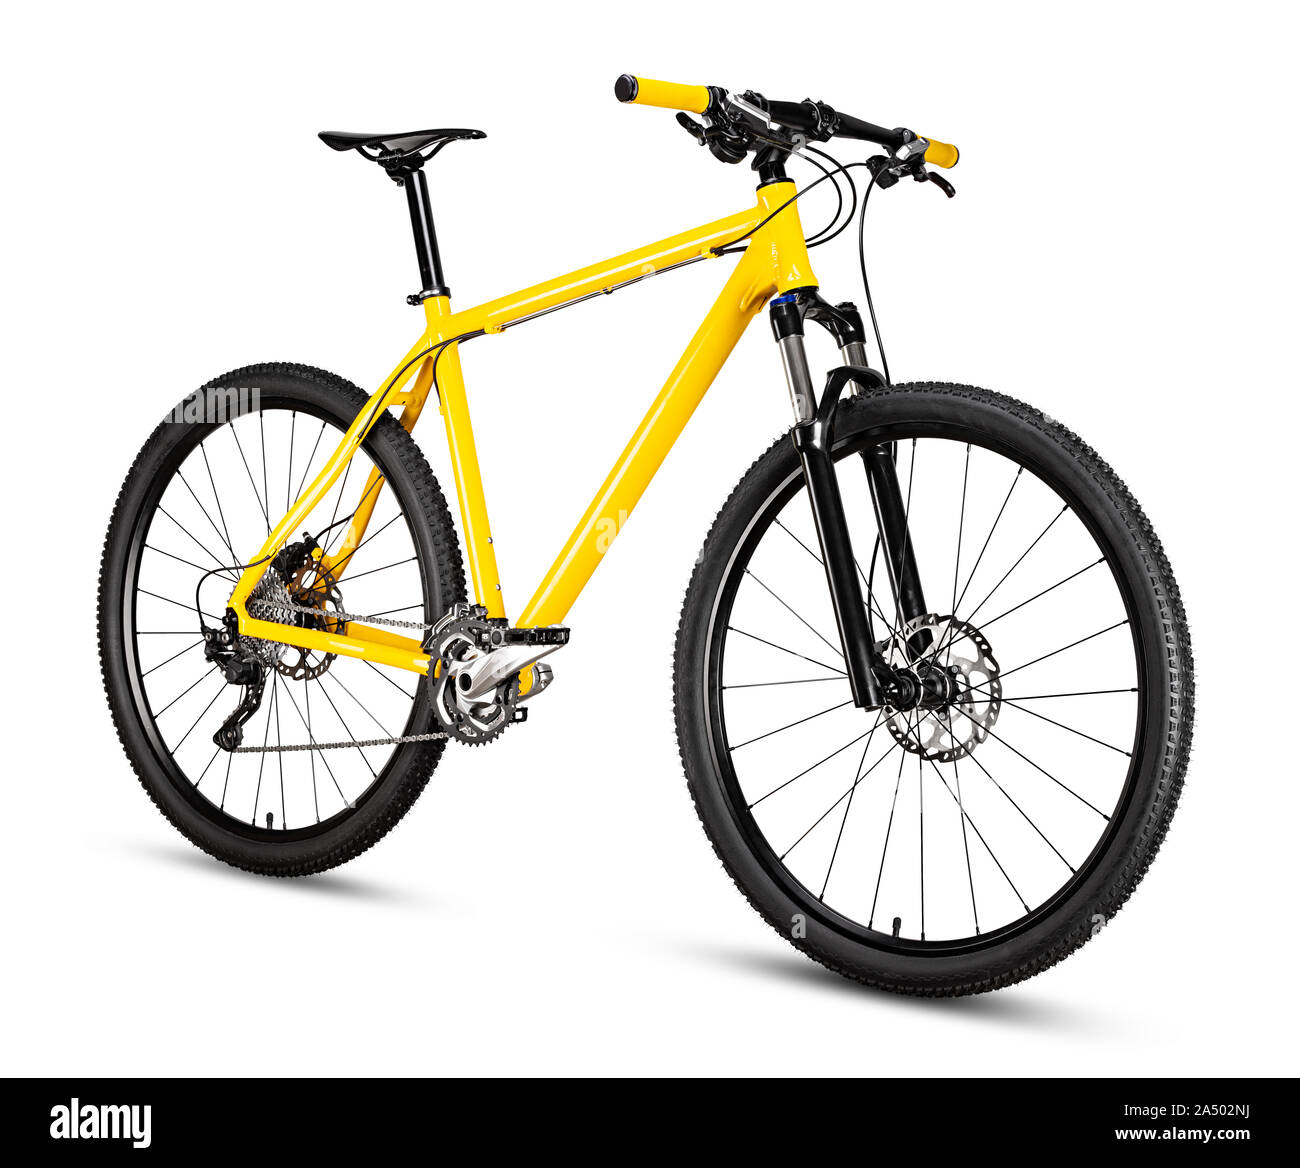 yellow black 29er mountainbike with thick offroad tyres. bicycle mtb cross country aluminum, cycling sport transport concept isolated on white backgro Stock Photo